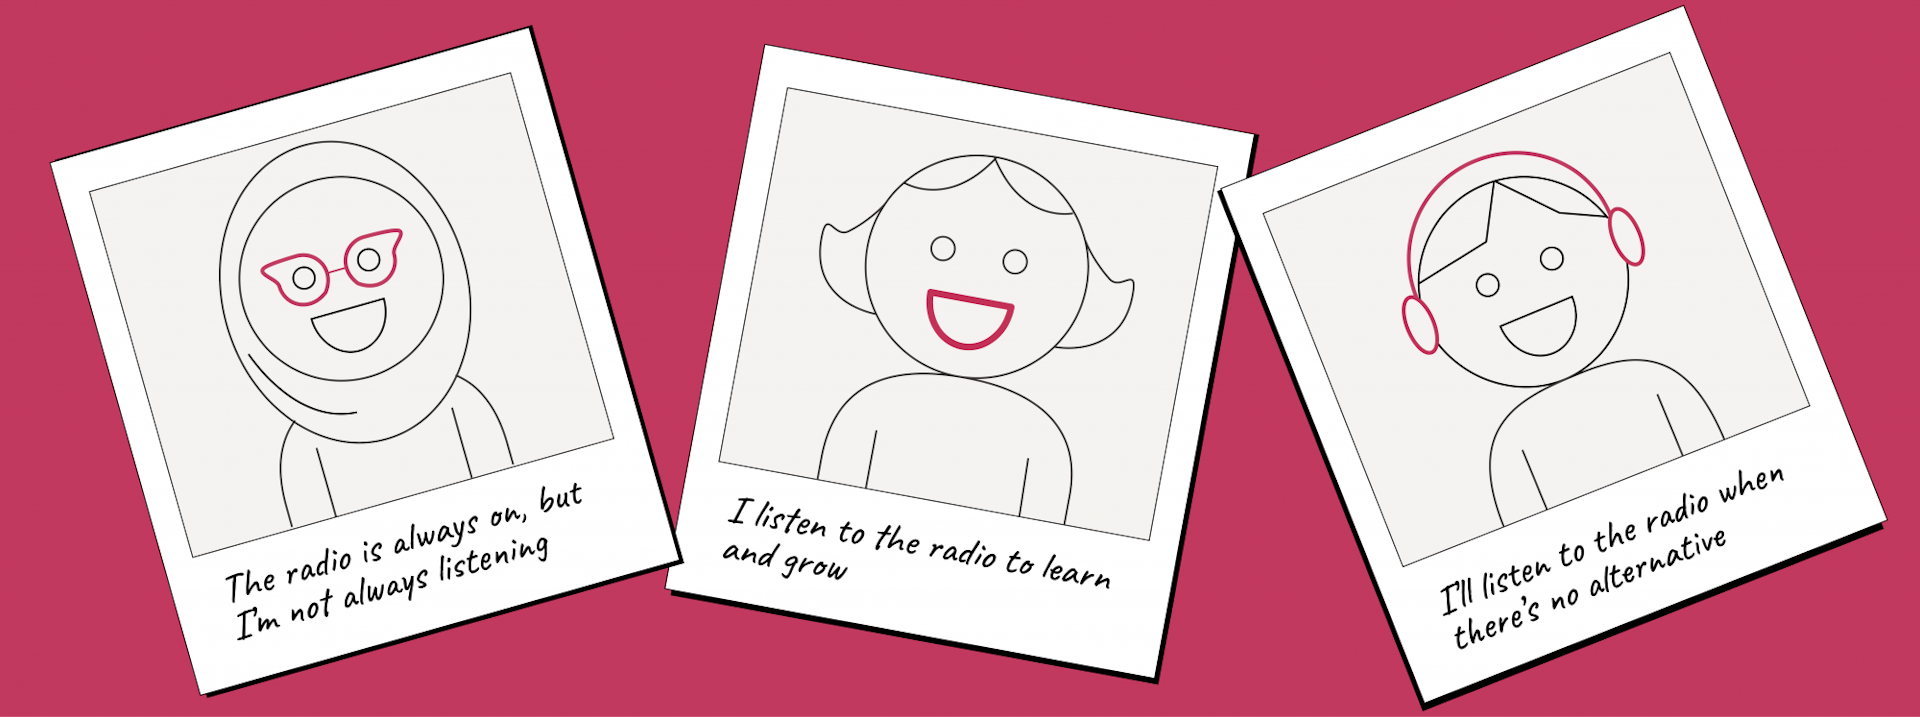 An illustration of polaroid photos depicting different personas speaking about their preferences when listening to the radio.